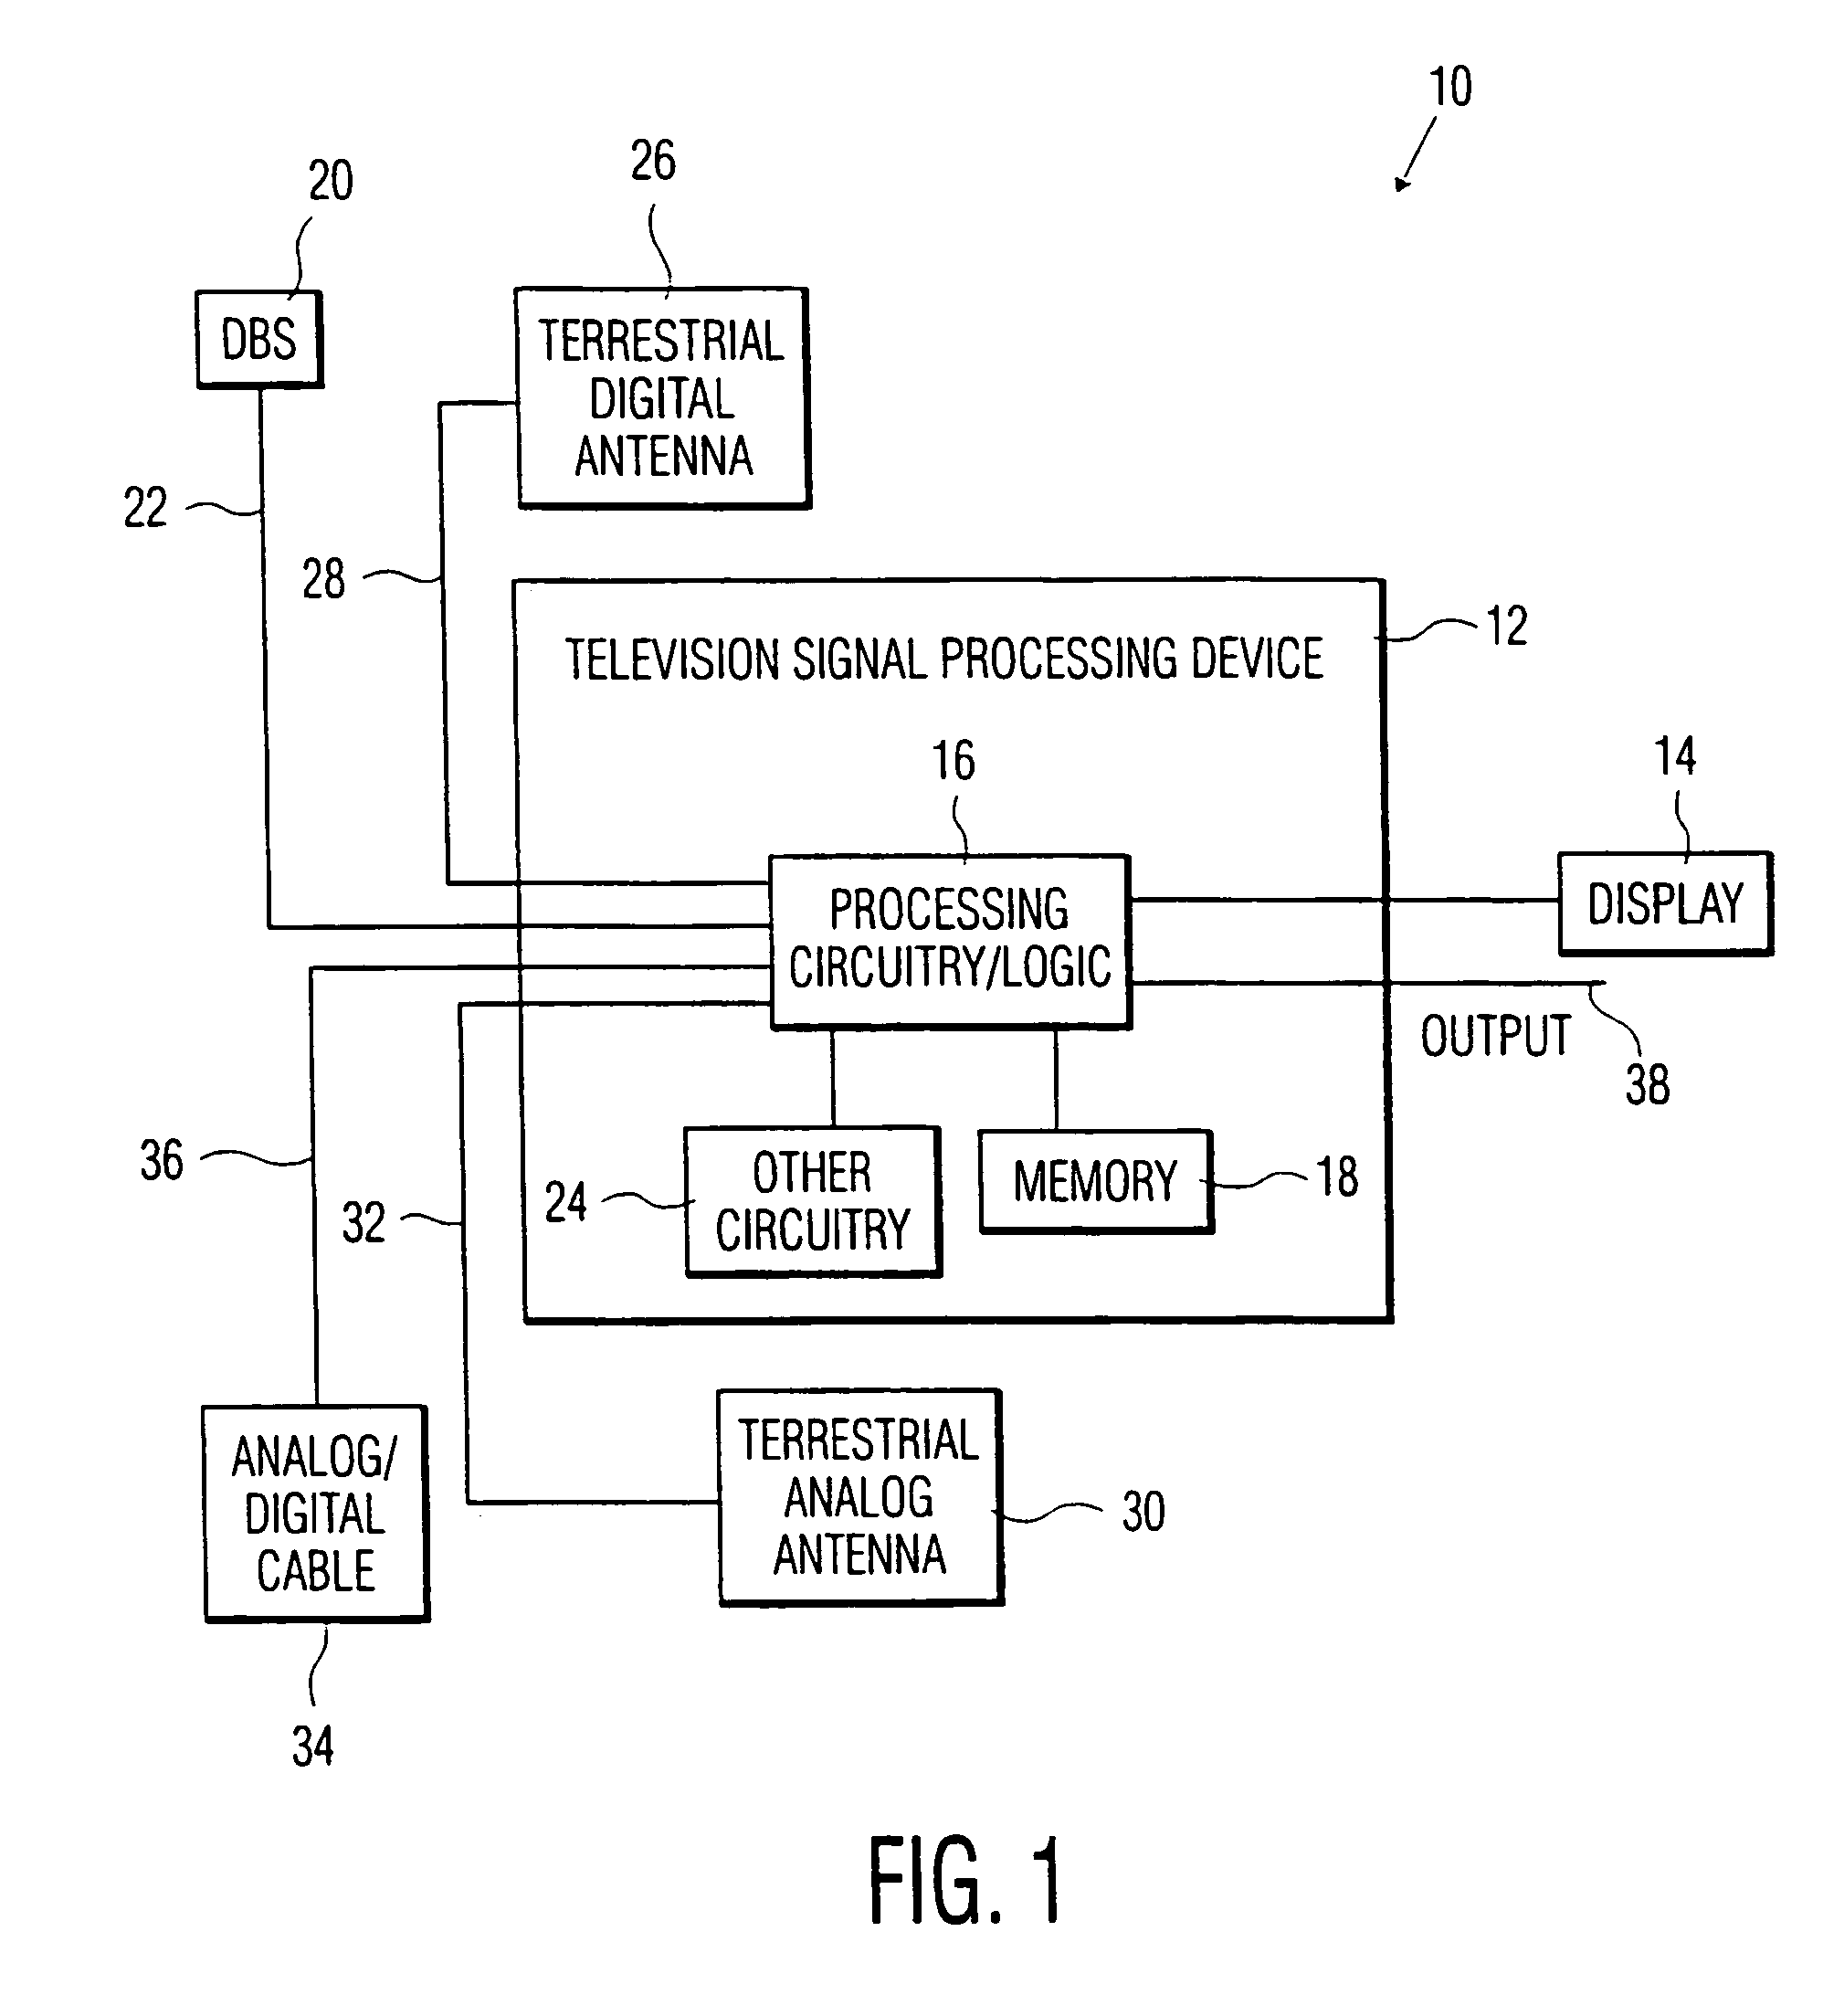 Digital and analog television signal digitization and processing device